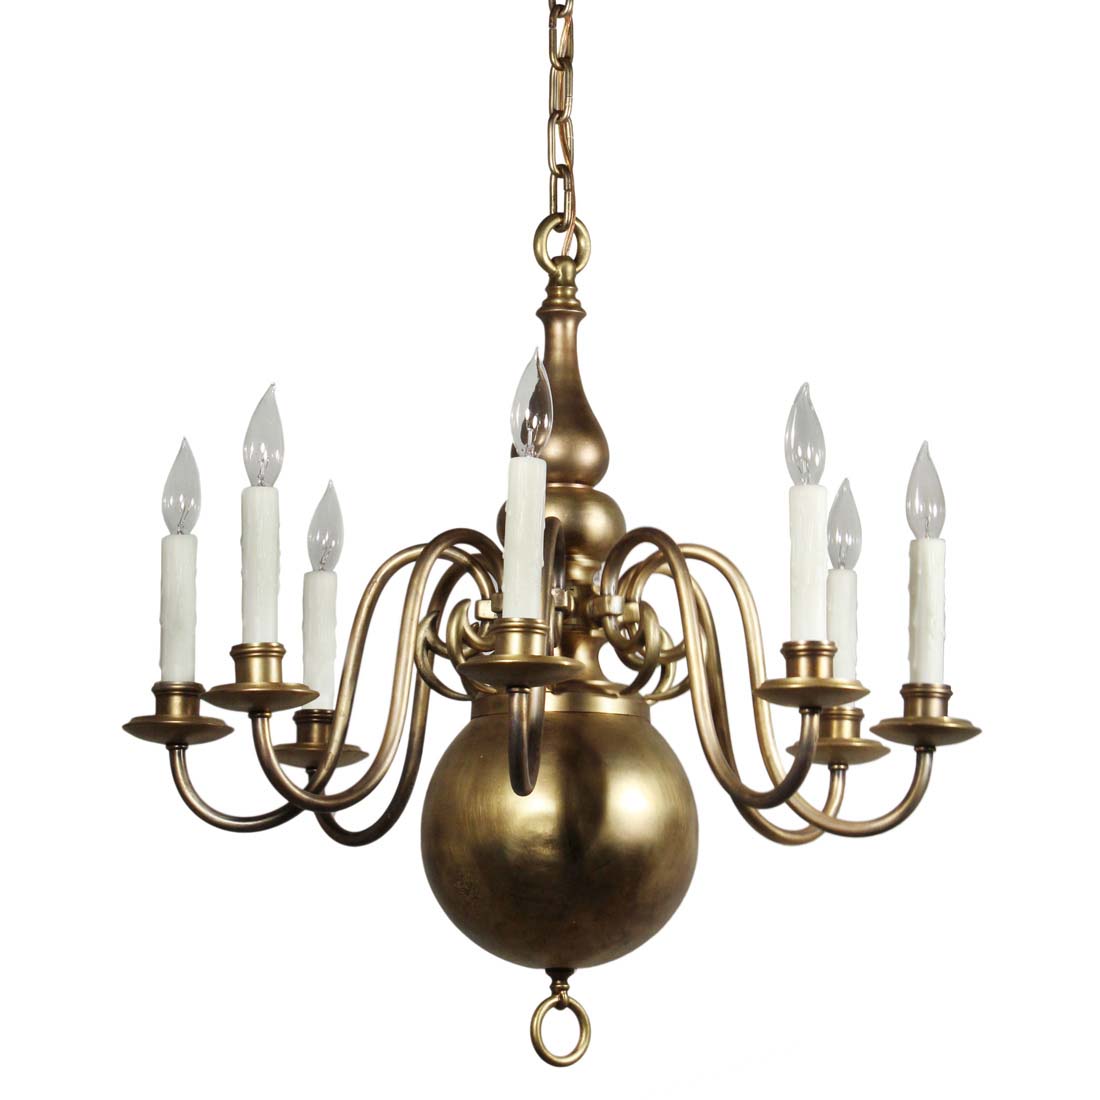 SOLD Antique Colonial Revival Brass Chandelier, Early 1900's - Antique  Lighting, Antique Lighting by Style, Archived Items, Ceiling, Colonial  Revival, Lighting, Multi-Arm Chandeliers - The Preservation Station